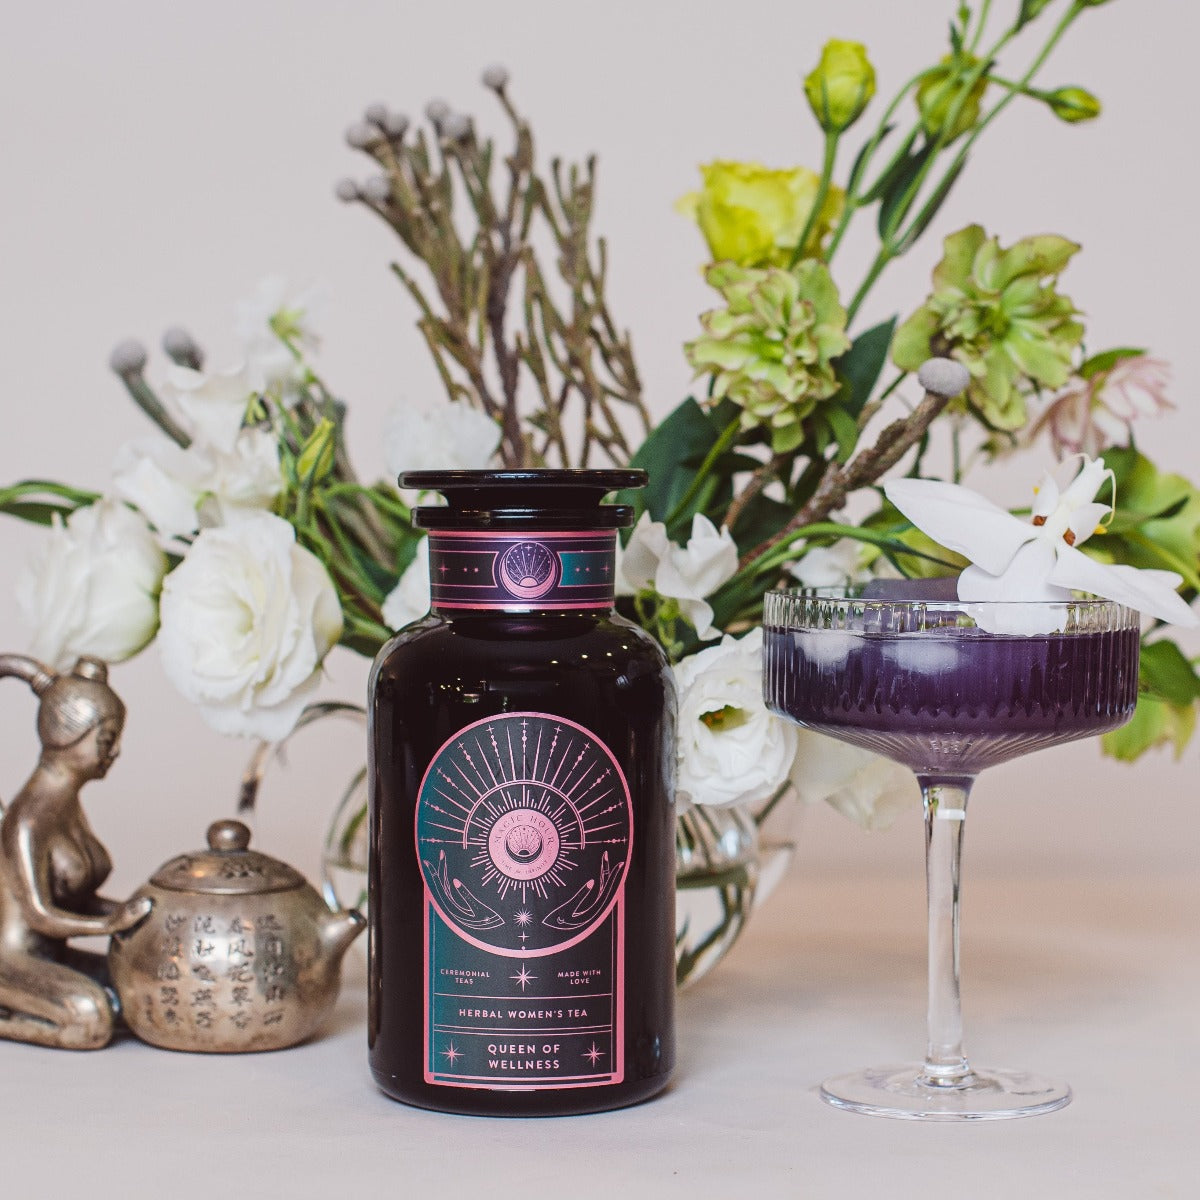 A glass bottle labeled "Magic Hour Queen of Wellness: Women's Hormone Balancing Tea for PMS, Healthy Cycles & Menopause" with a dark brownish-purple liquid stands next to a glass goblet of the same liquid garnished with a white flower. In the background are white and green flowers, a small statue, and a teapot alongside an assortment of loose leaf tea from Magic Hour.